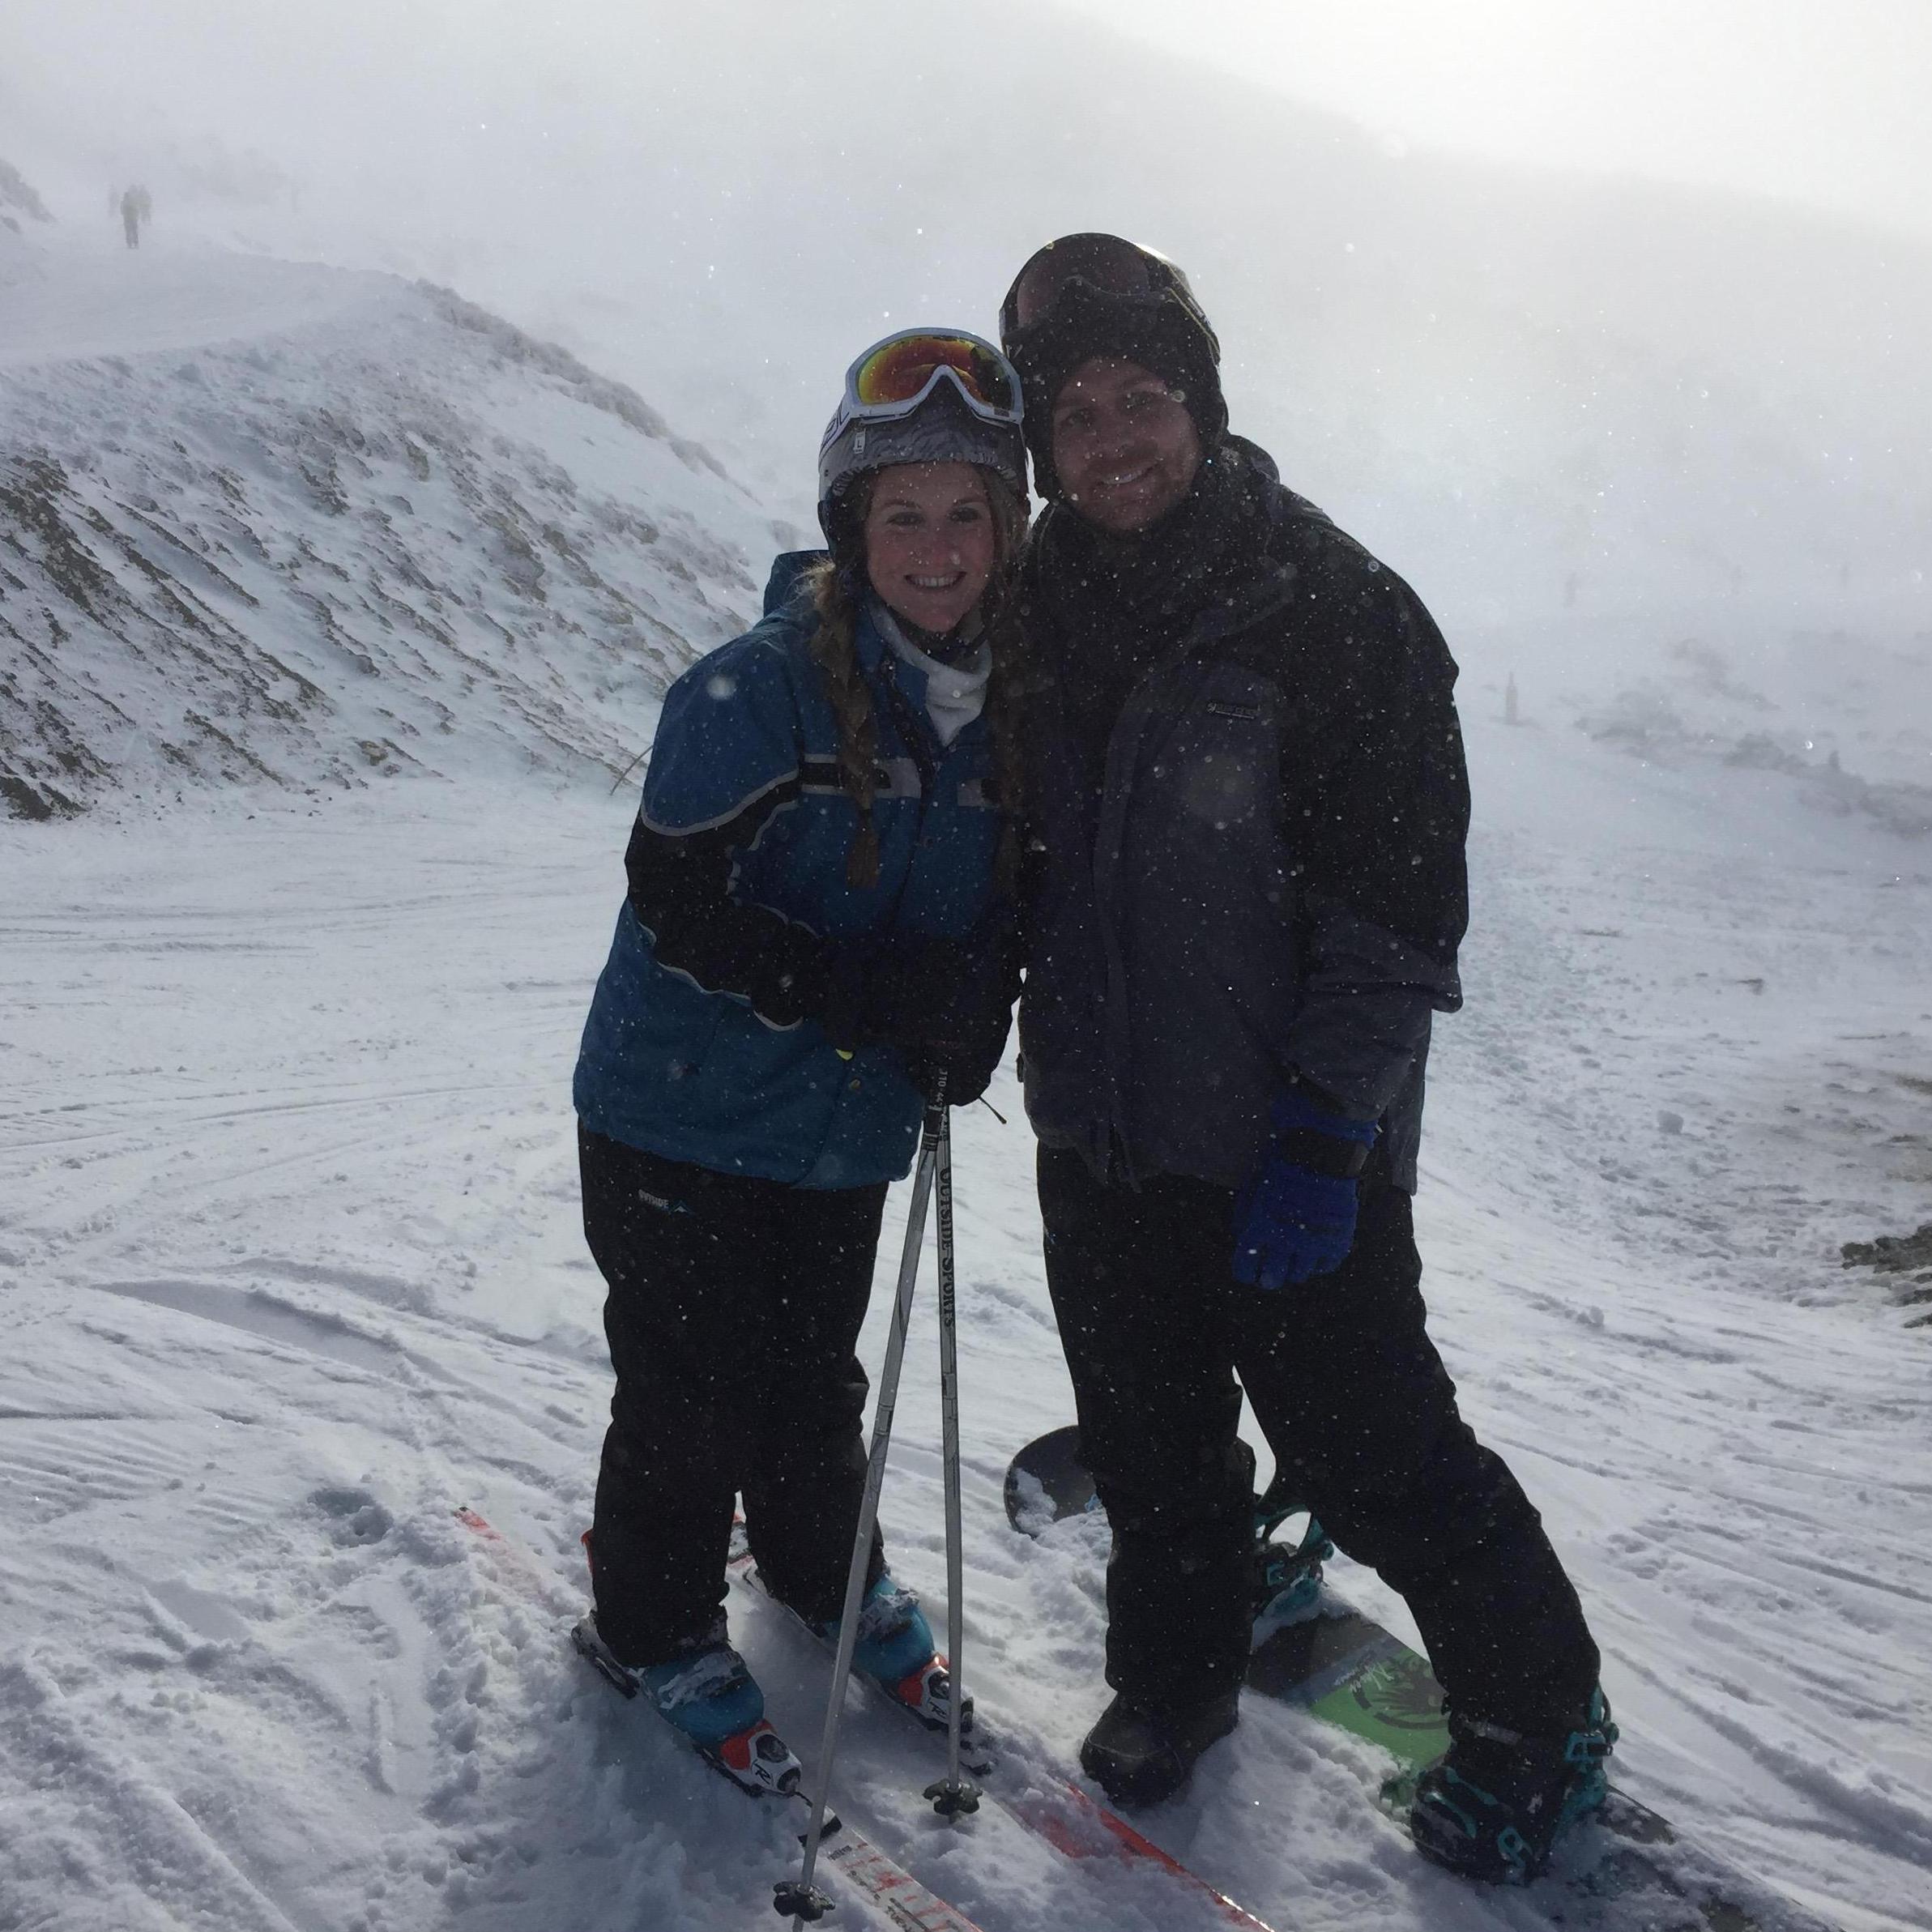 Our first time skiing together and it happened to be New Zealand!